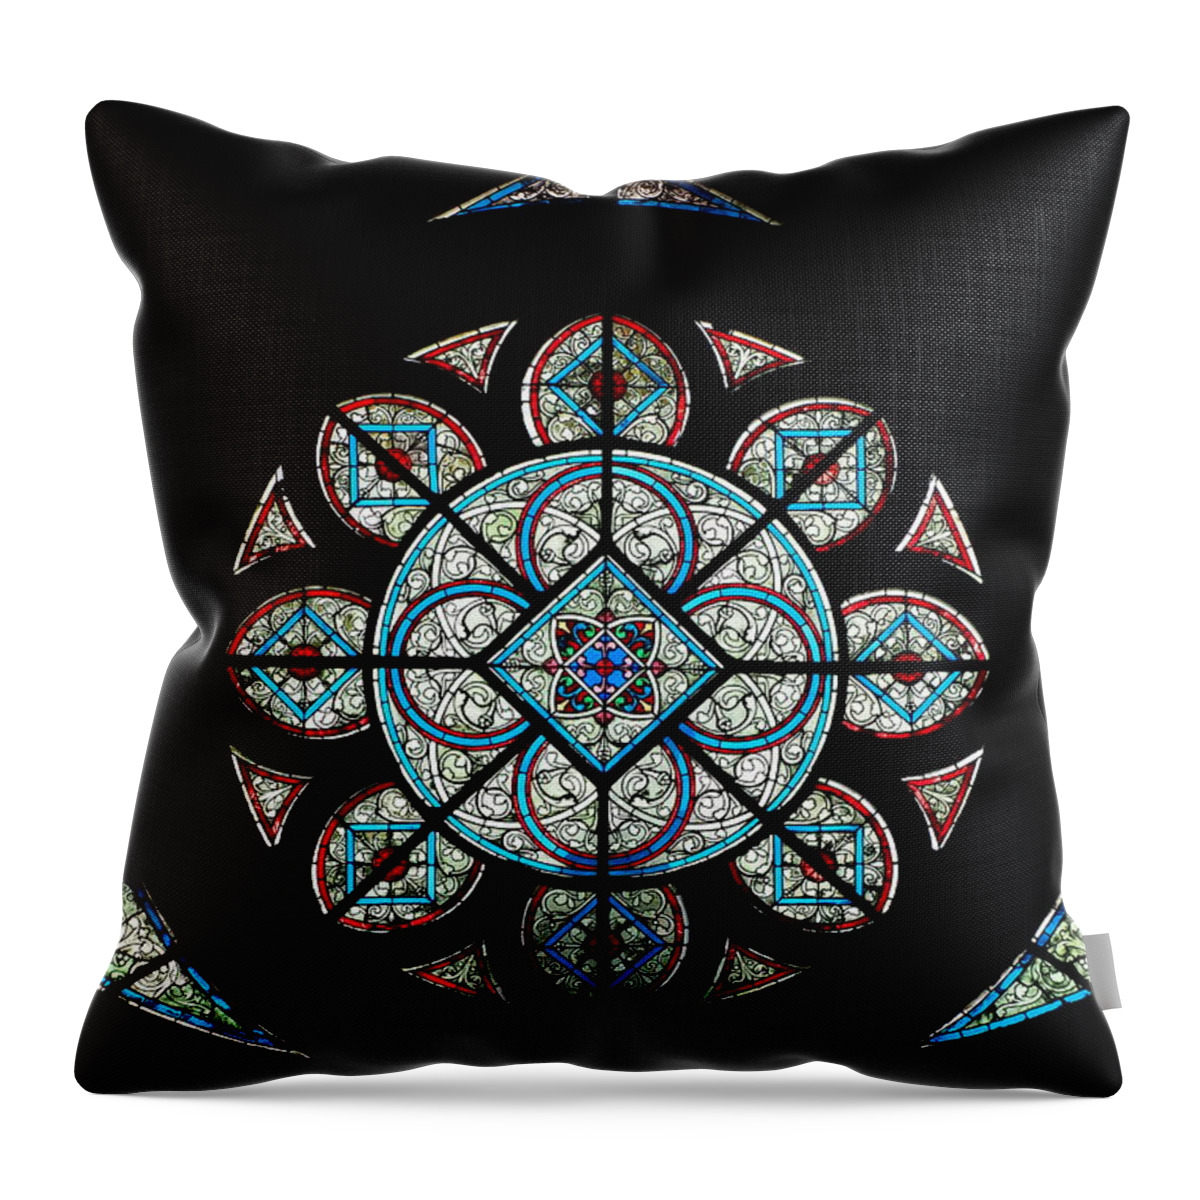 Stained Glass Window Throw Pillow featuring the glass art Rose window of Amiens Cathedral by Photographed by Alf van Beem